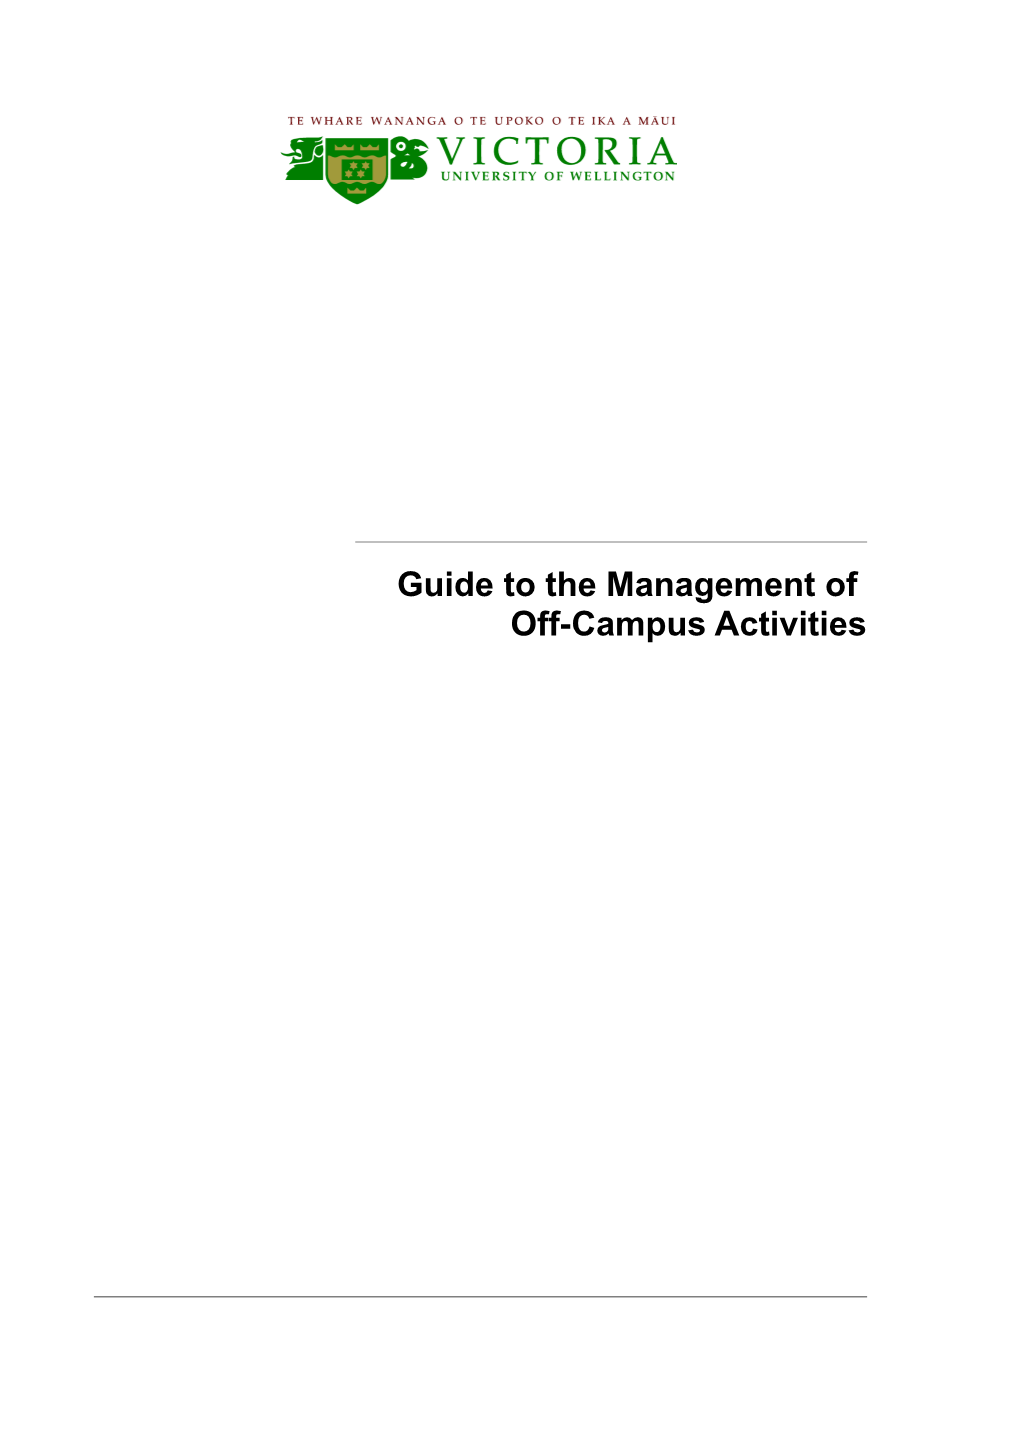 Guide to the Management of Off-Campus Activities